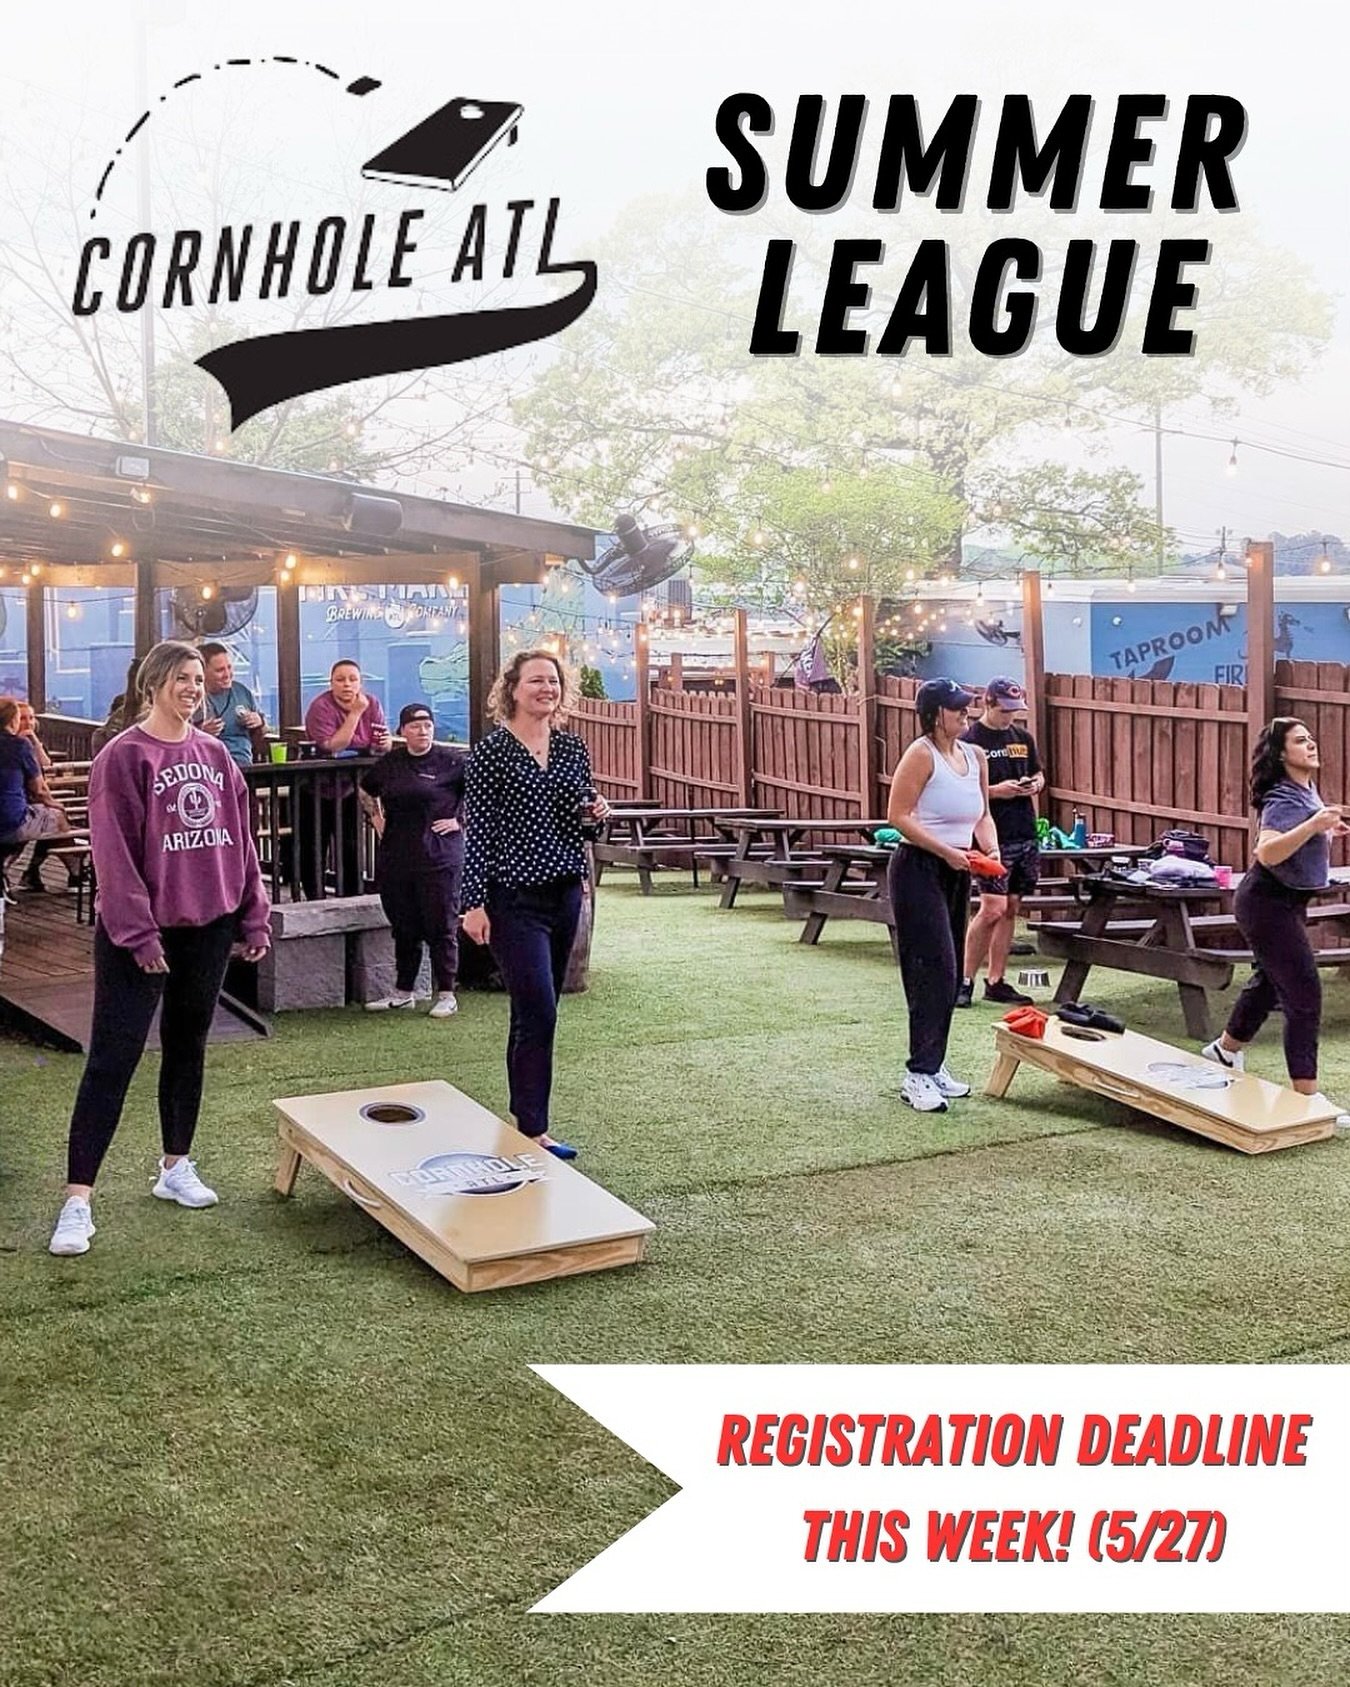 Registration deadline this week‼️

Make cornhole your new Summer hobby ☀️ with @cornholeatl Summer League at Fire Maker! 

Starting Monday June 3rd, experience 7 weeks of cornhole play with friends and family! Set up your team and register at the lin